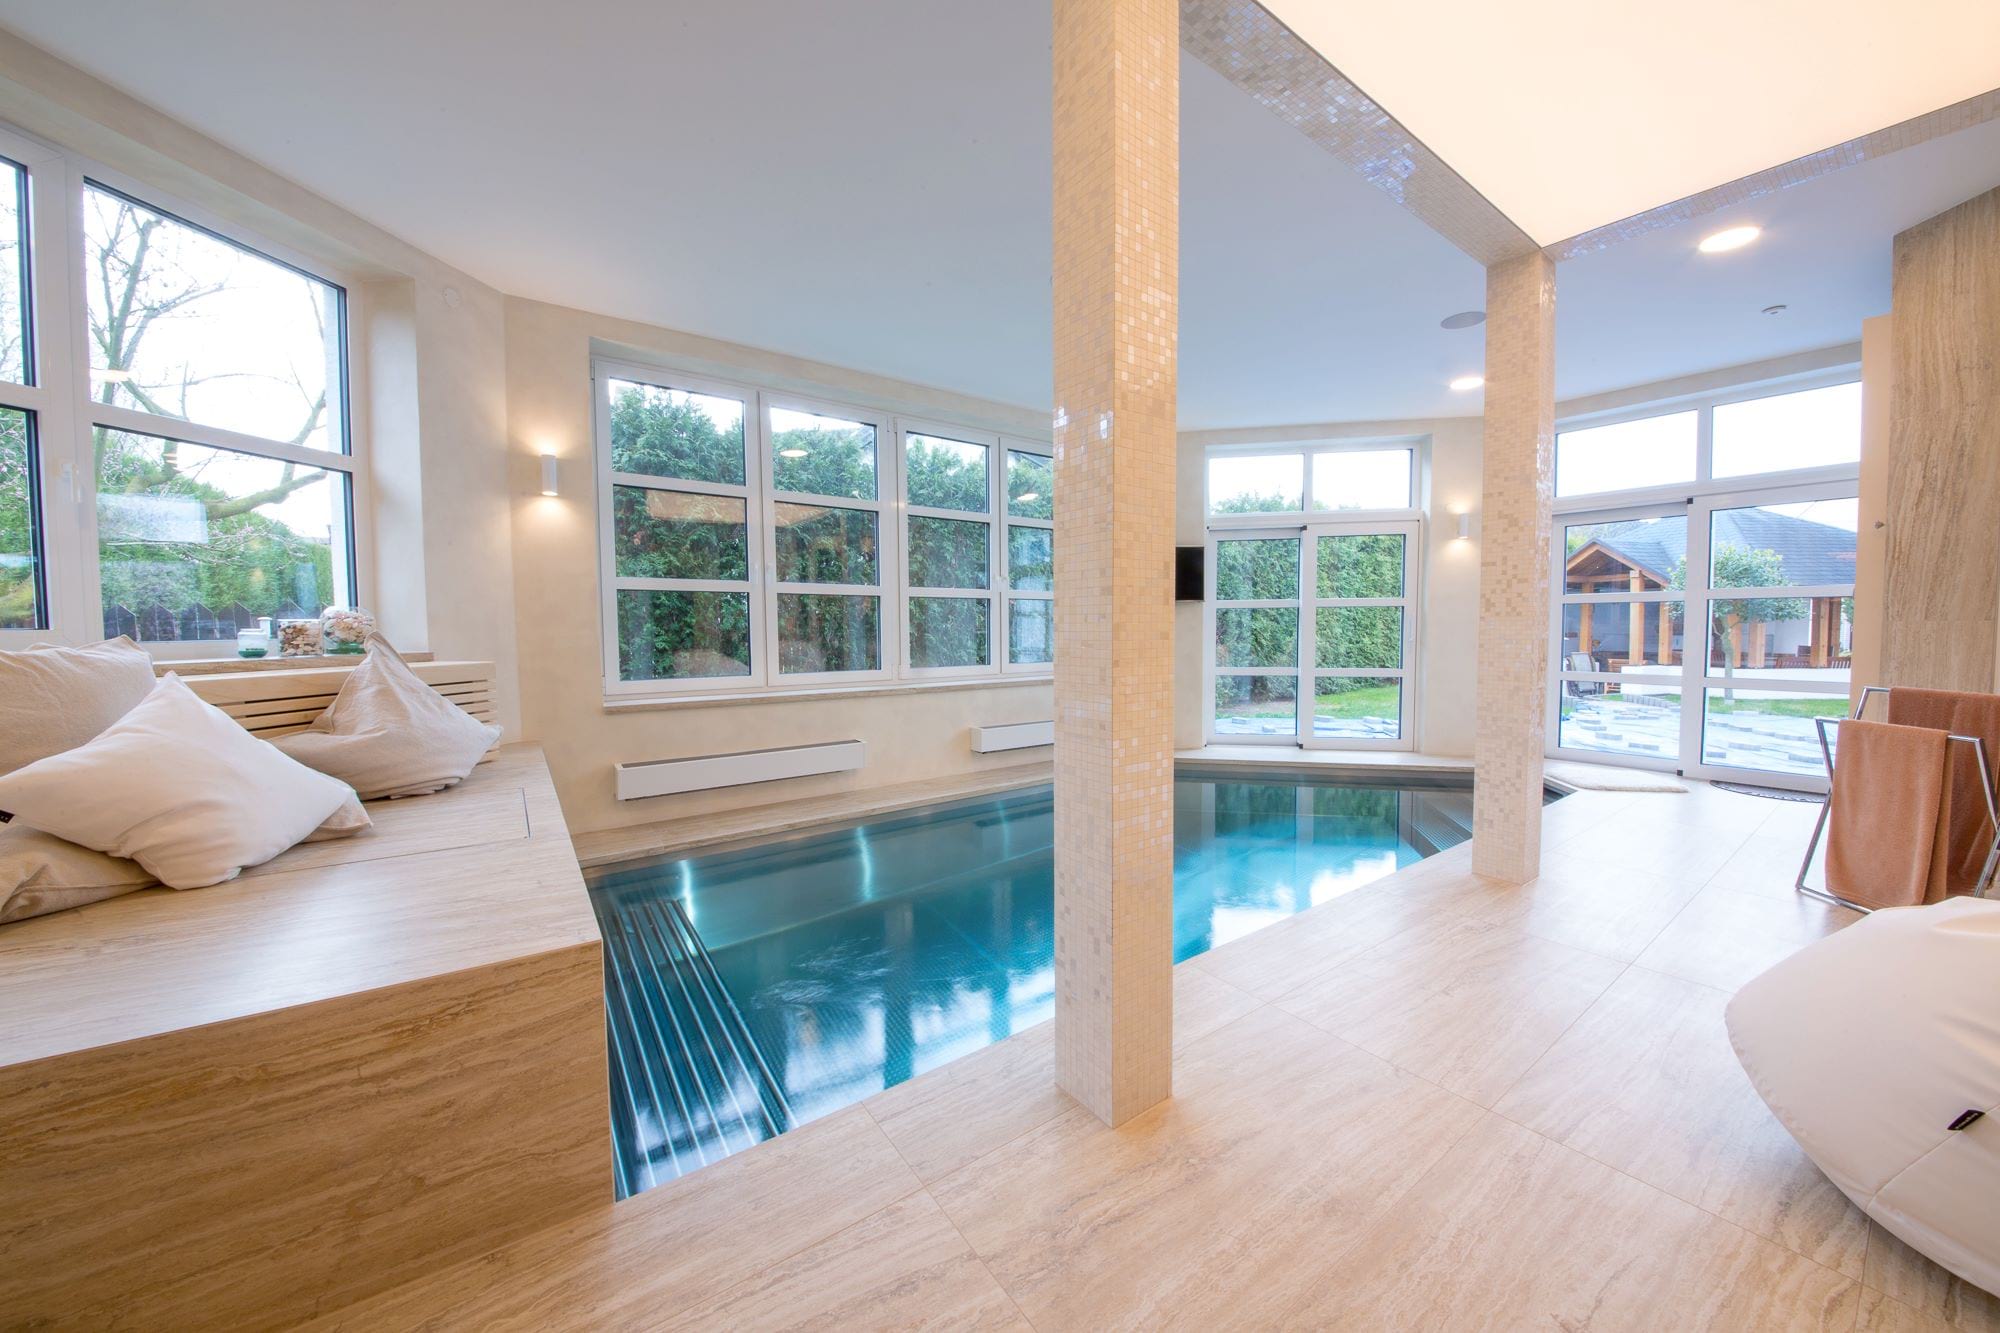 Private Interior with Atypically Shaped Pool with Massage Bench